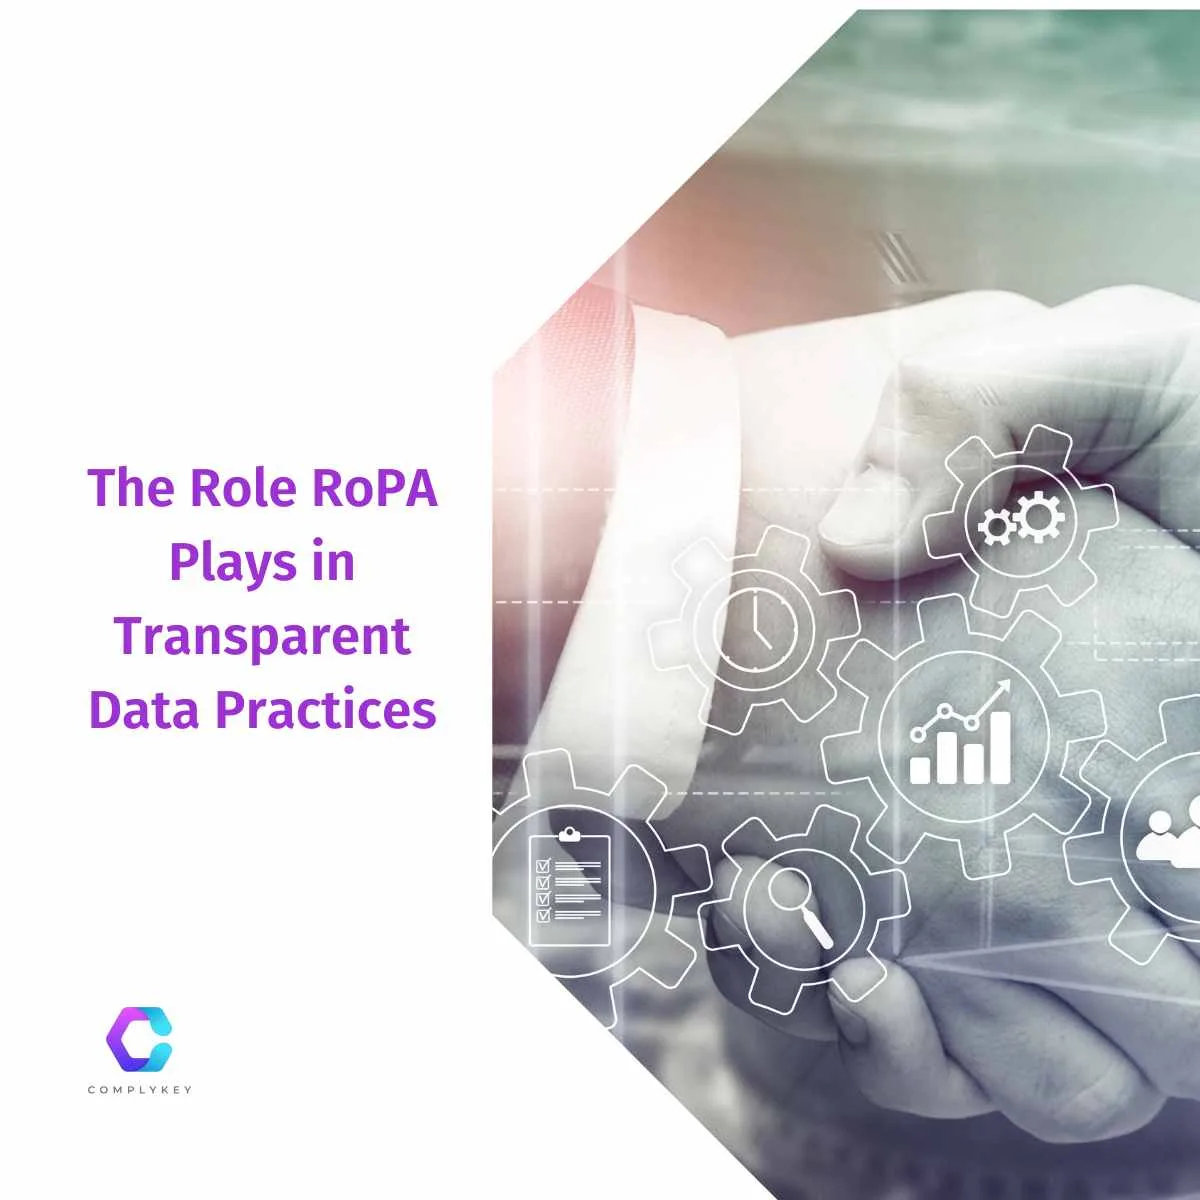 Blog header image. The role RoPA plays in Transparent Data Practices